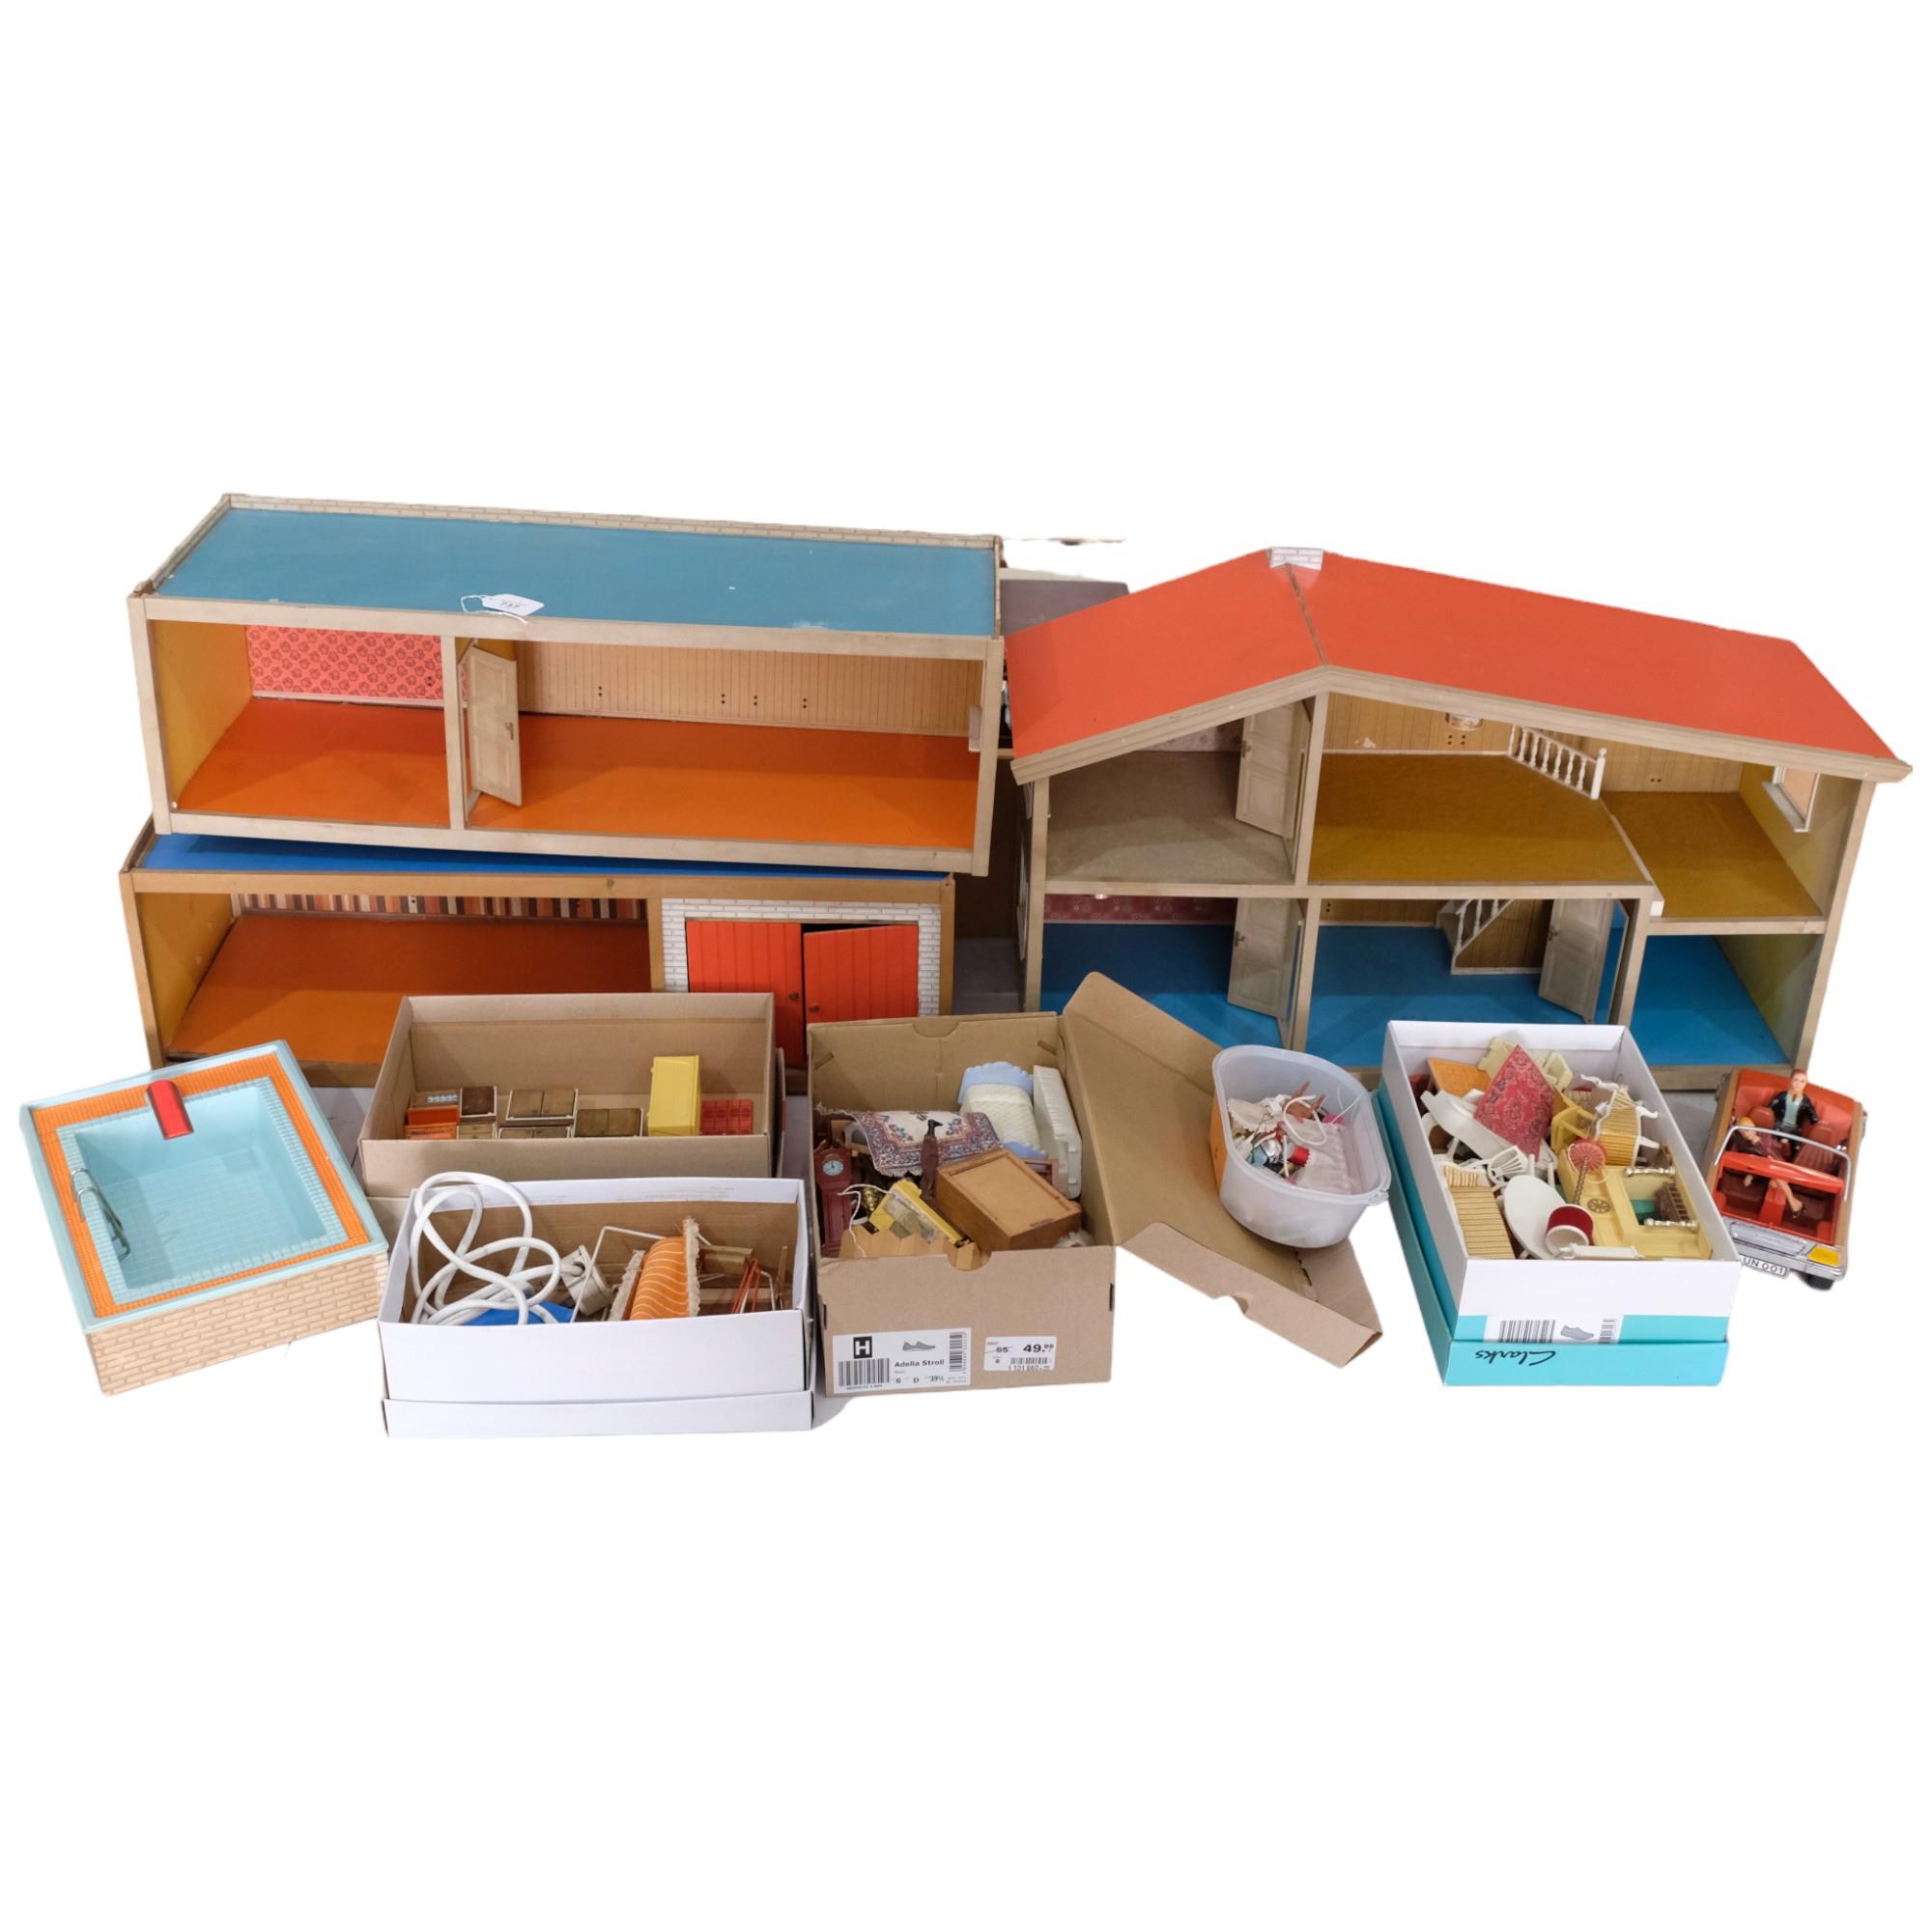 LUNDBY A large mid-century hand-built wooden doll's house, 3 separate sections including garage